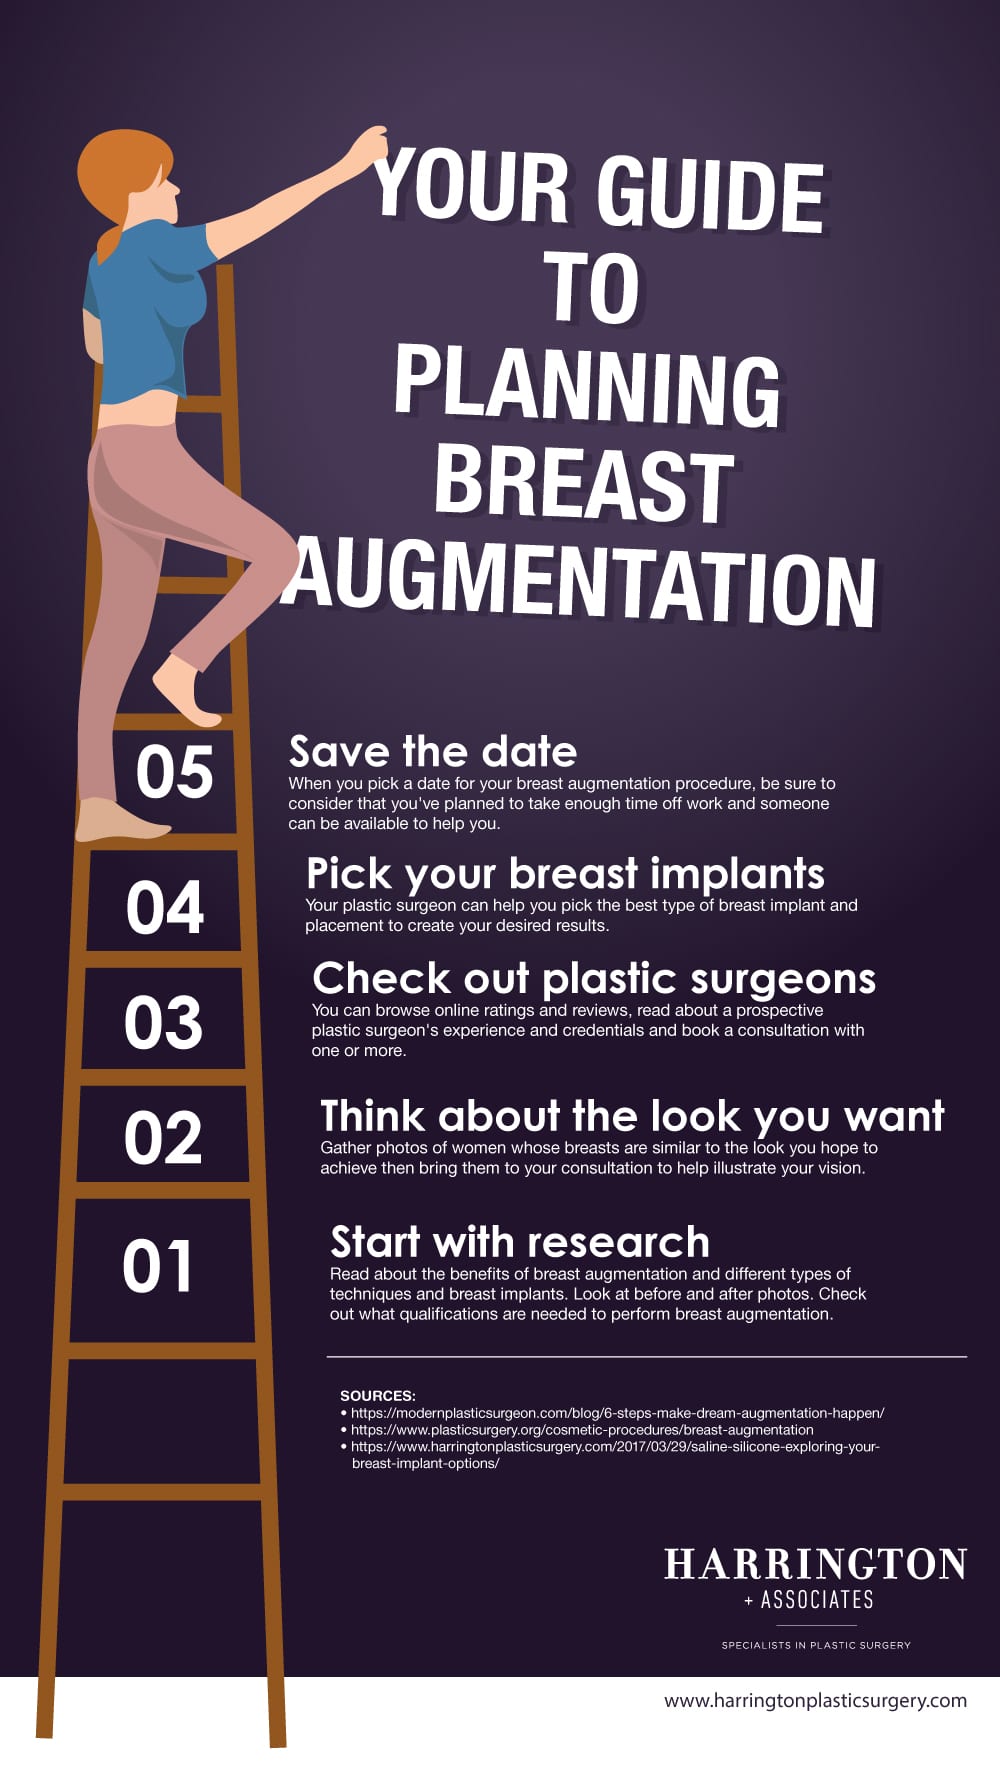 Your Guide to Planning Breast Augmentation [Infographic]